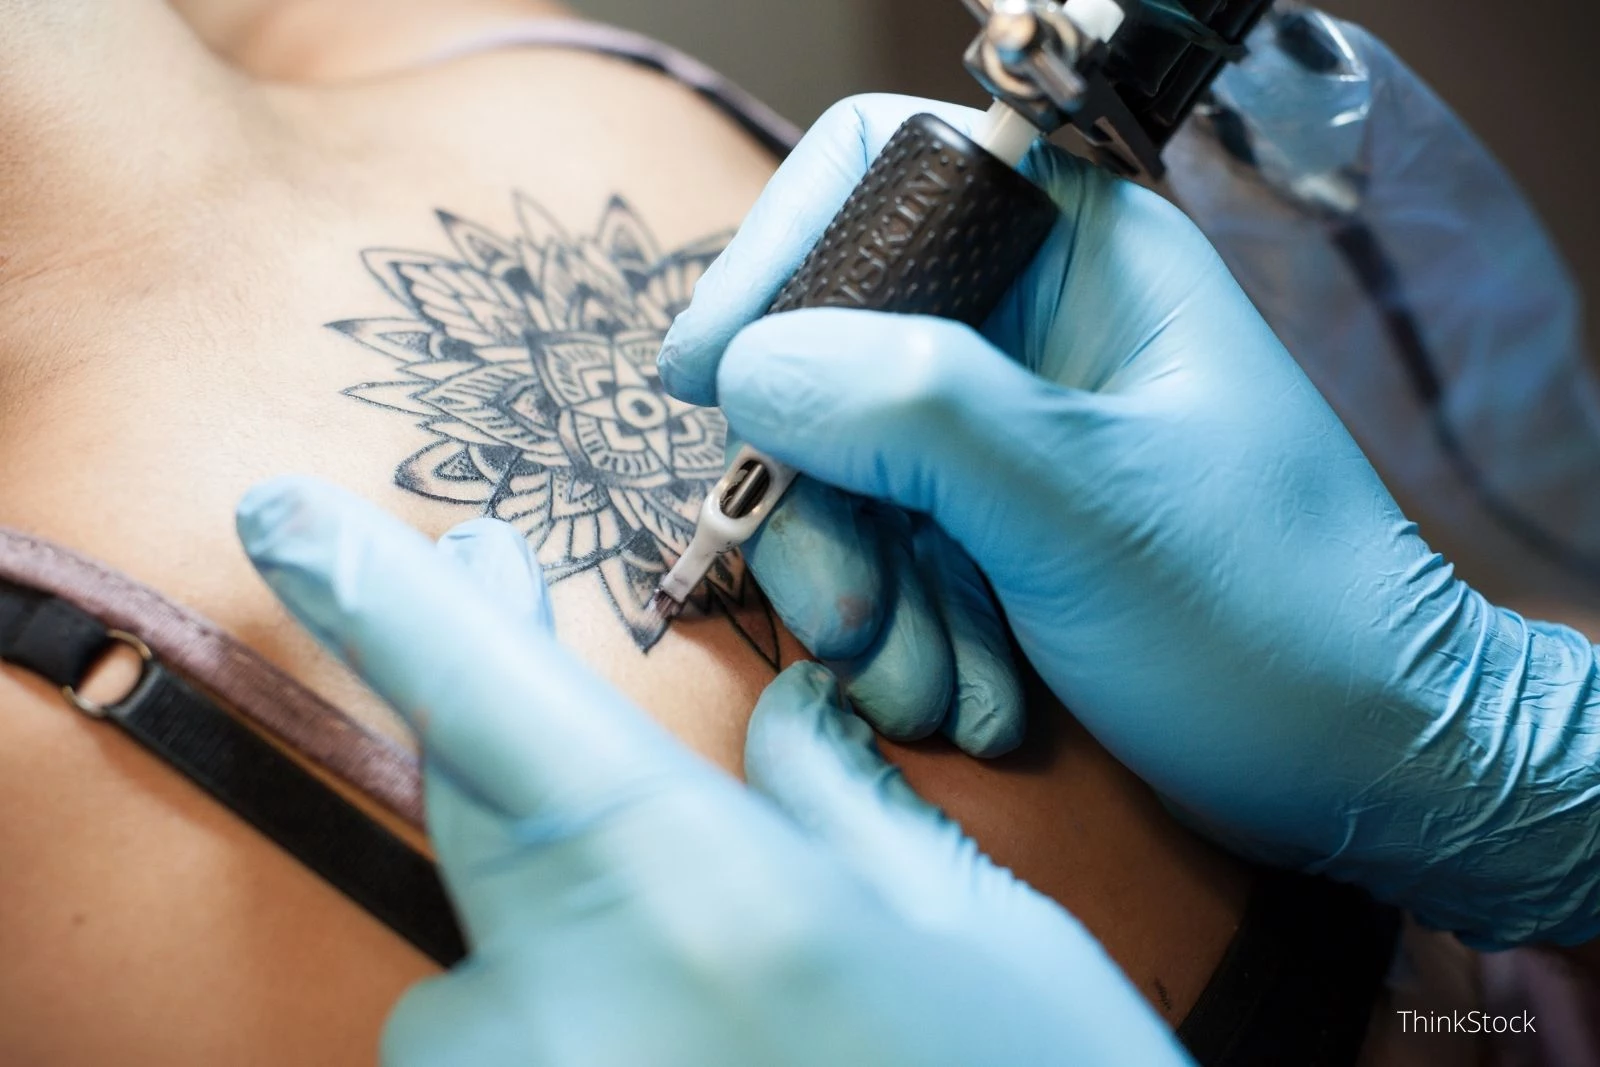 The 10 Best Tattoo Parlors in New York